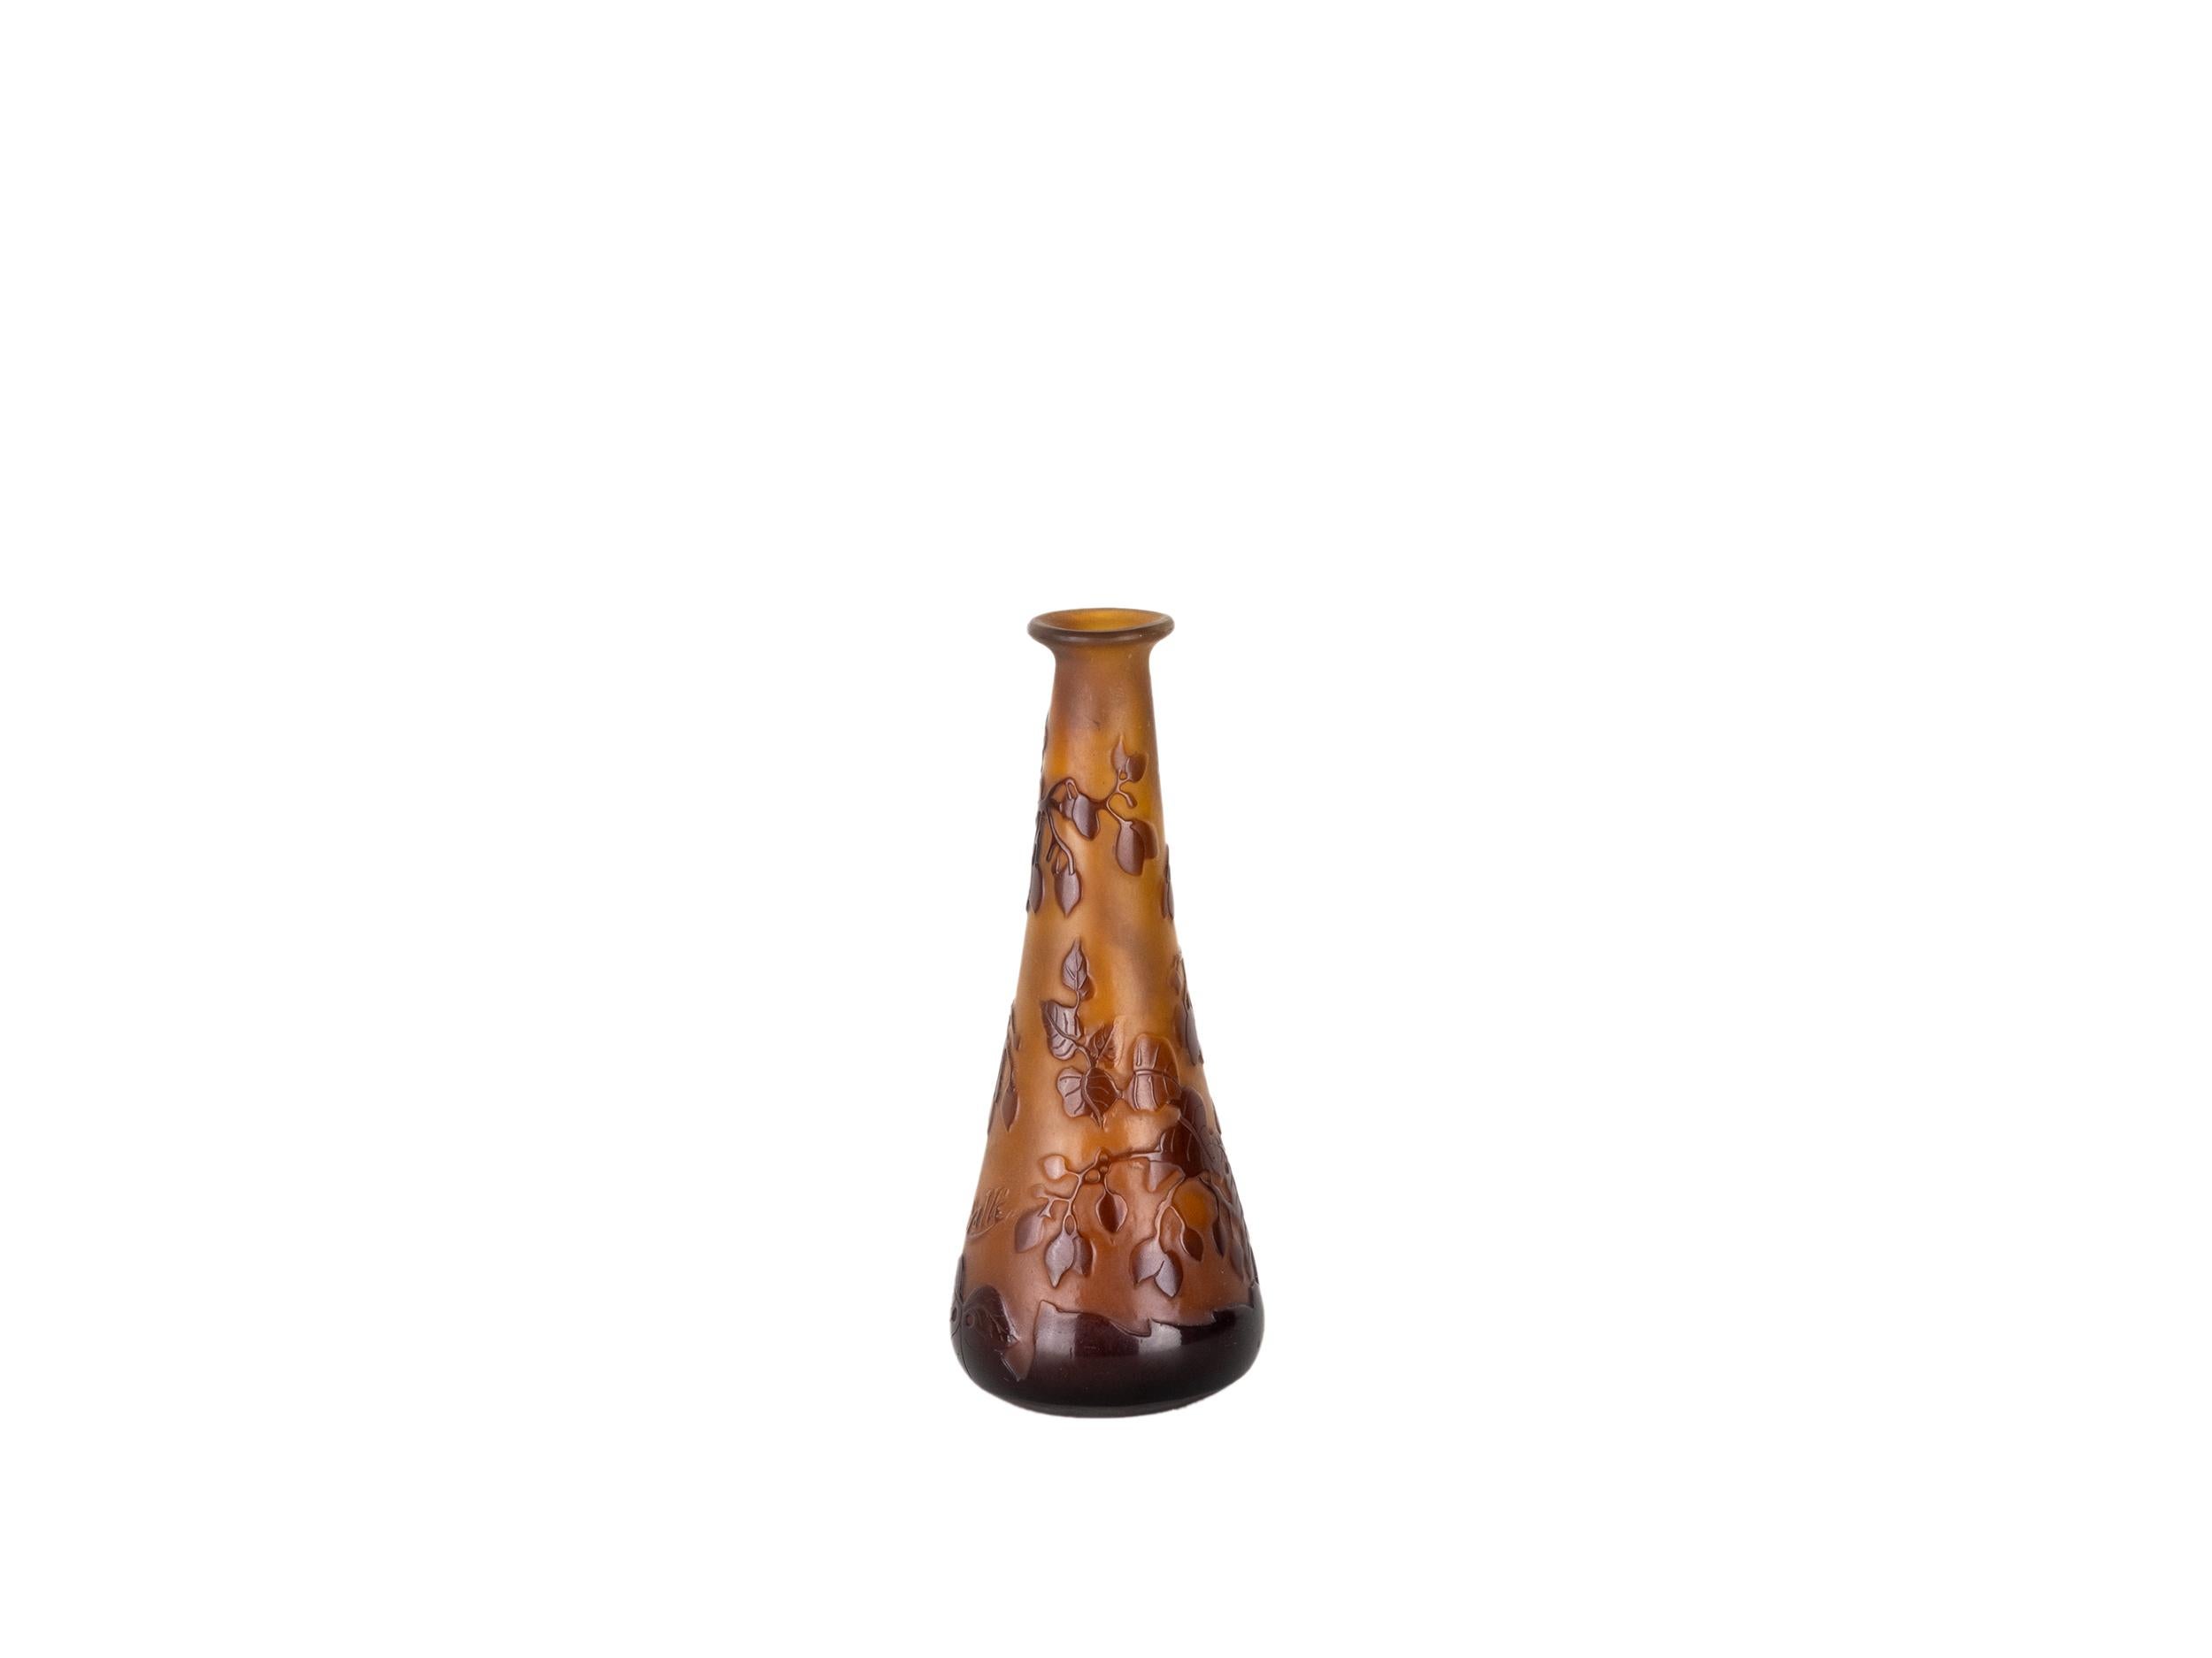 French Clover Tree Brown Glass Vase by Emile Galle, 20th Century For Sale